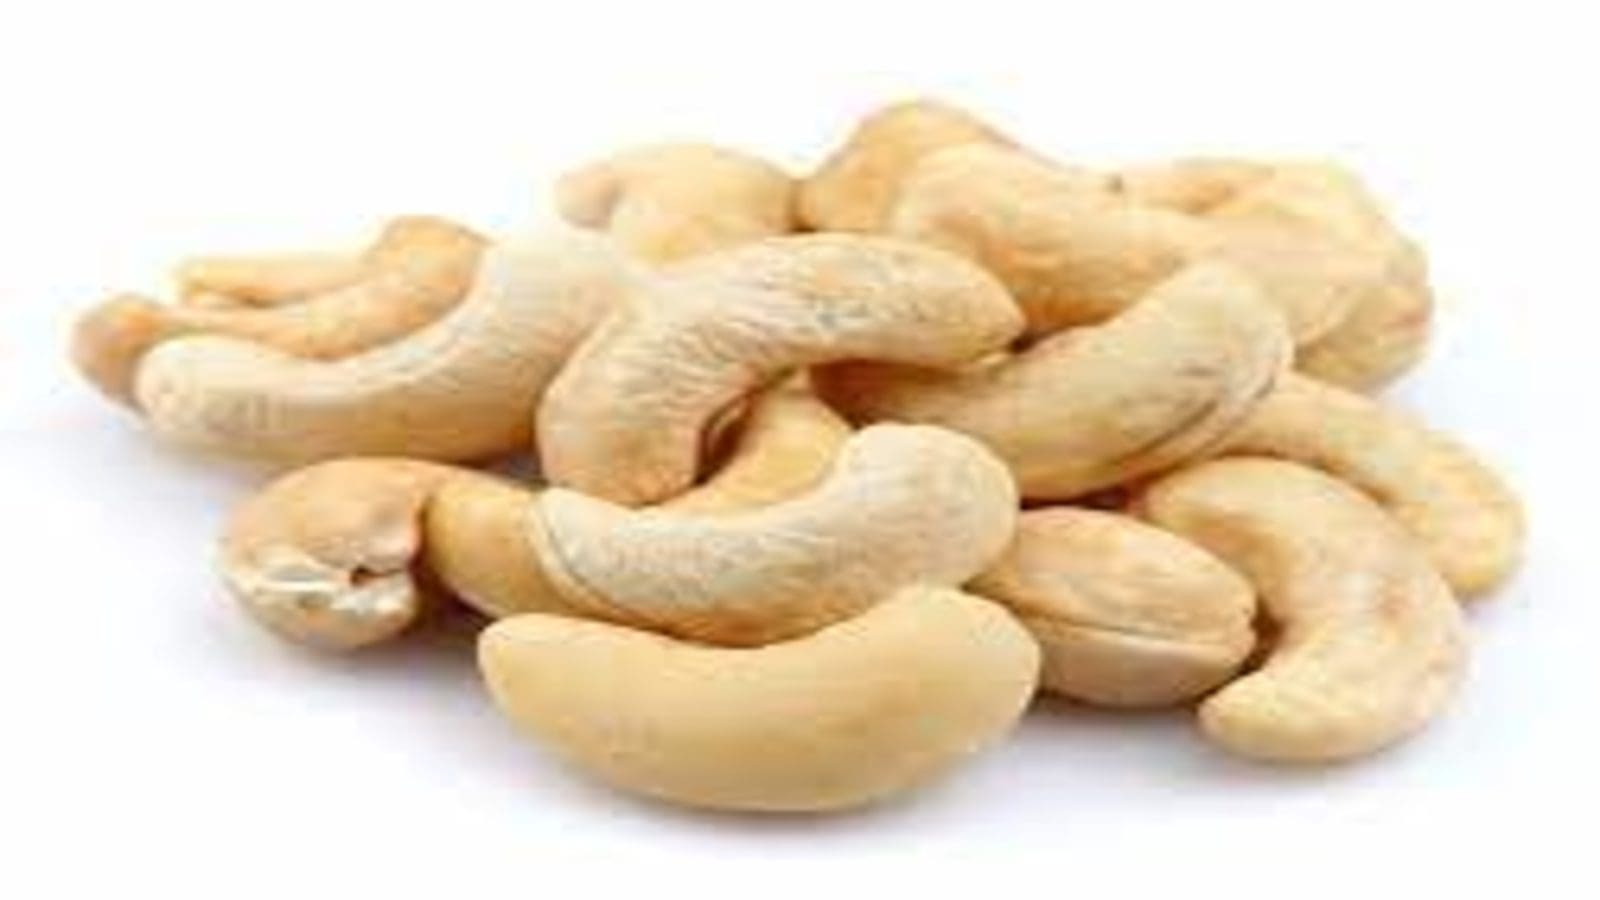 Tanzania to construct state-of-the-art cashew nut factory to boost local processing